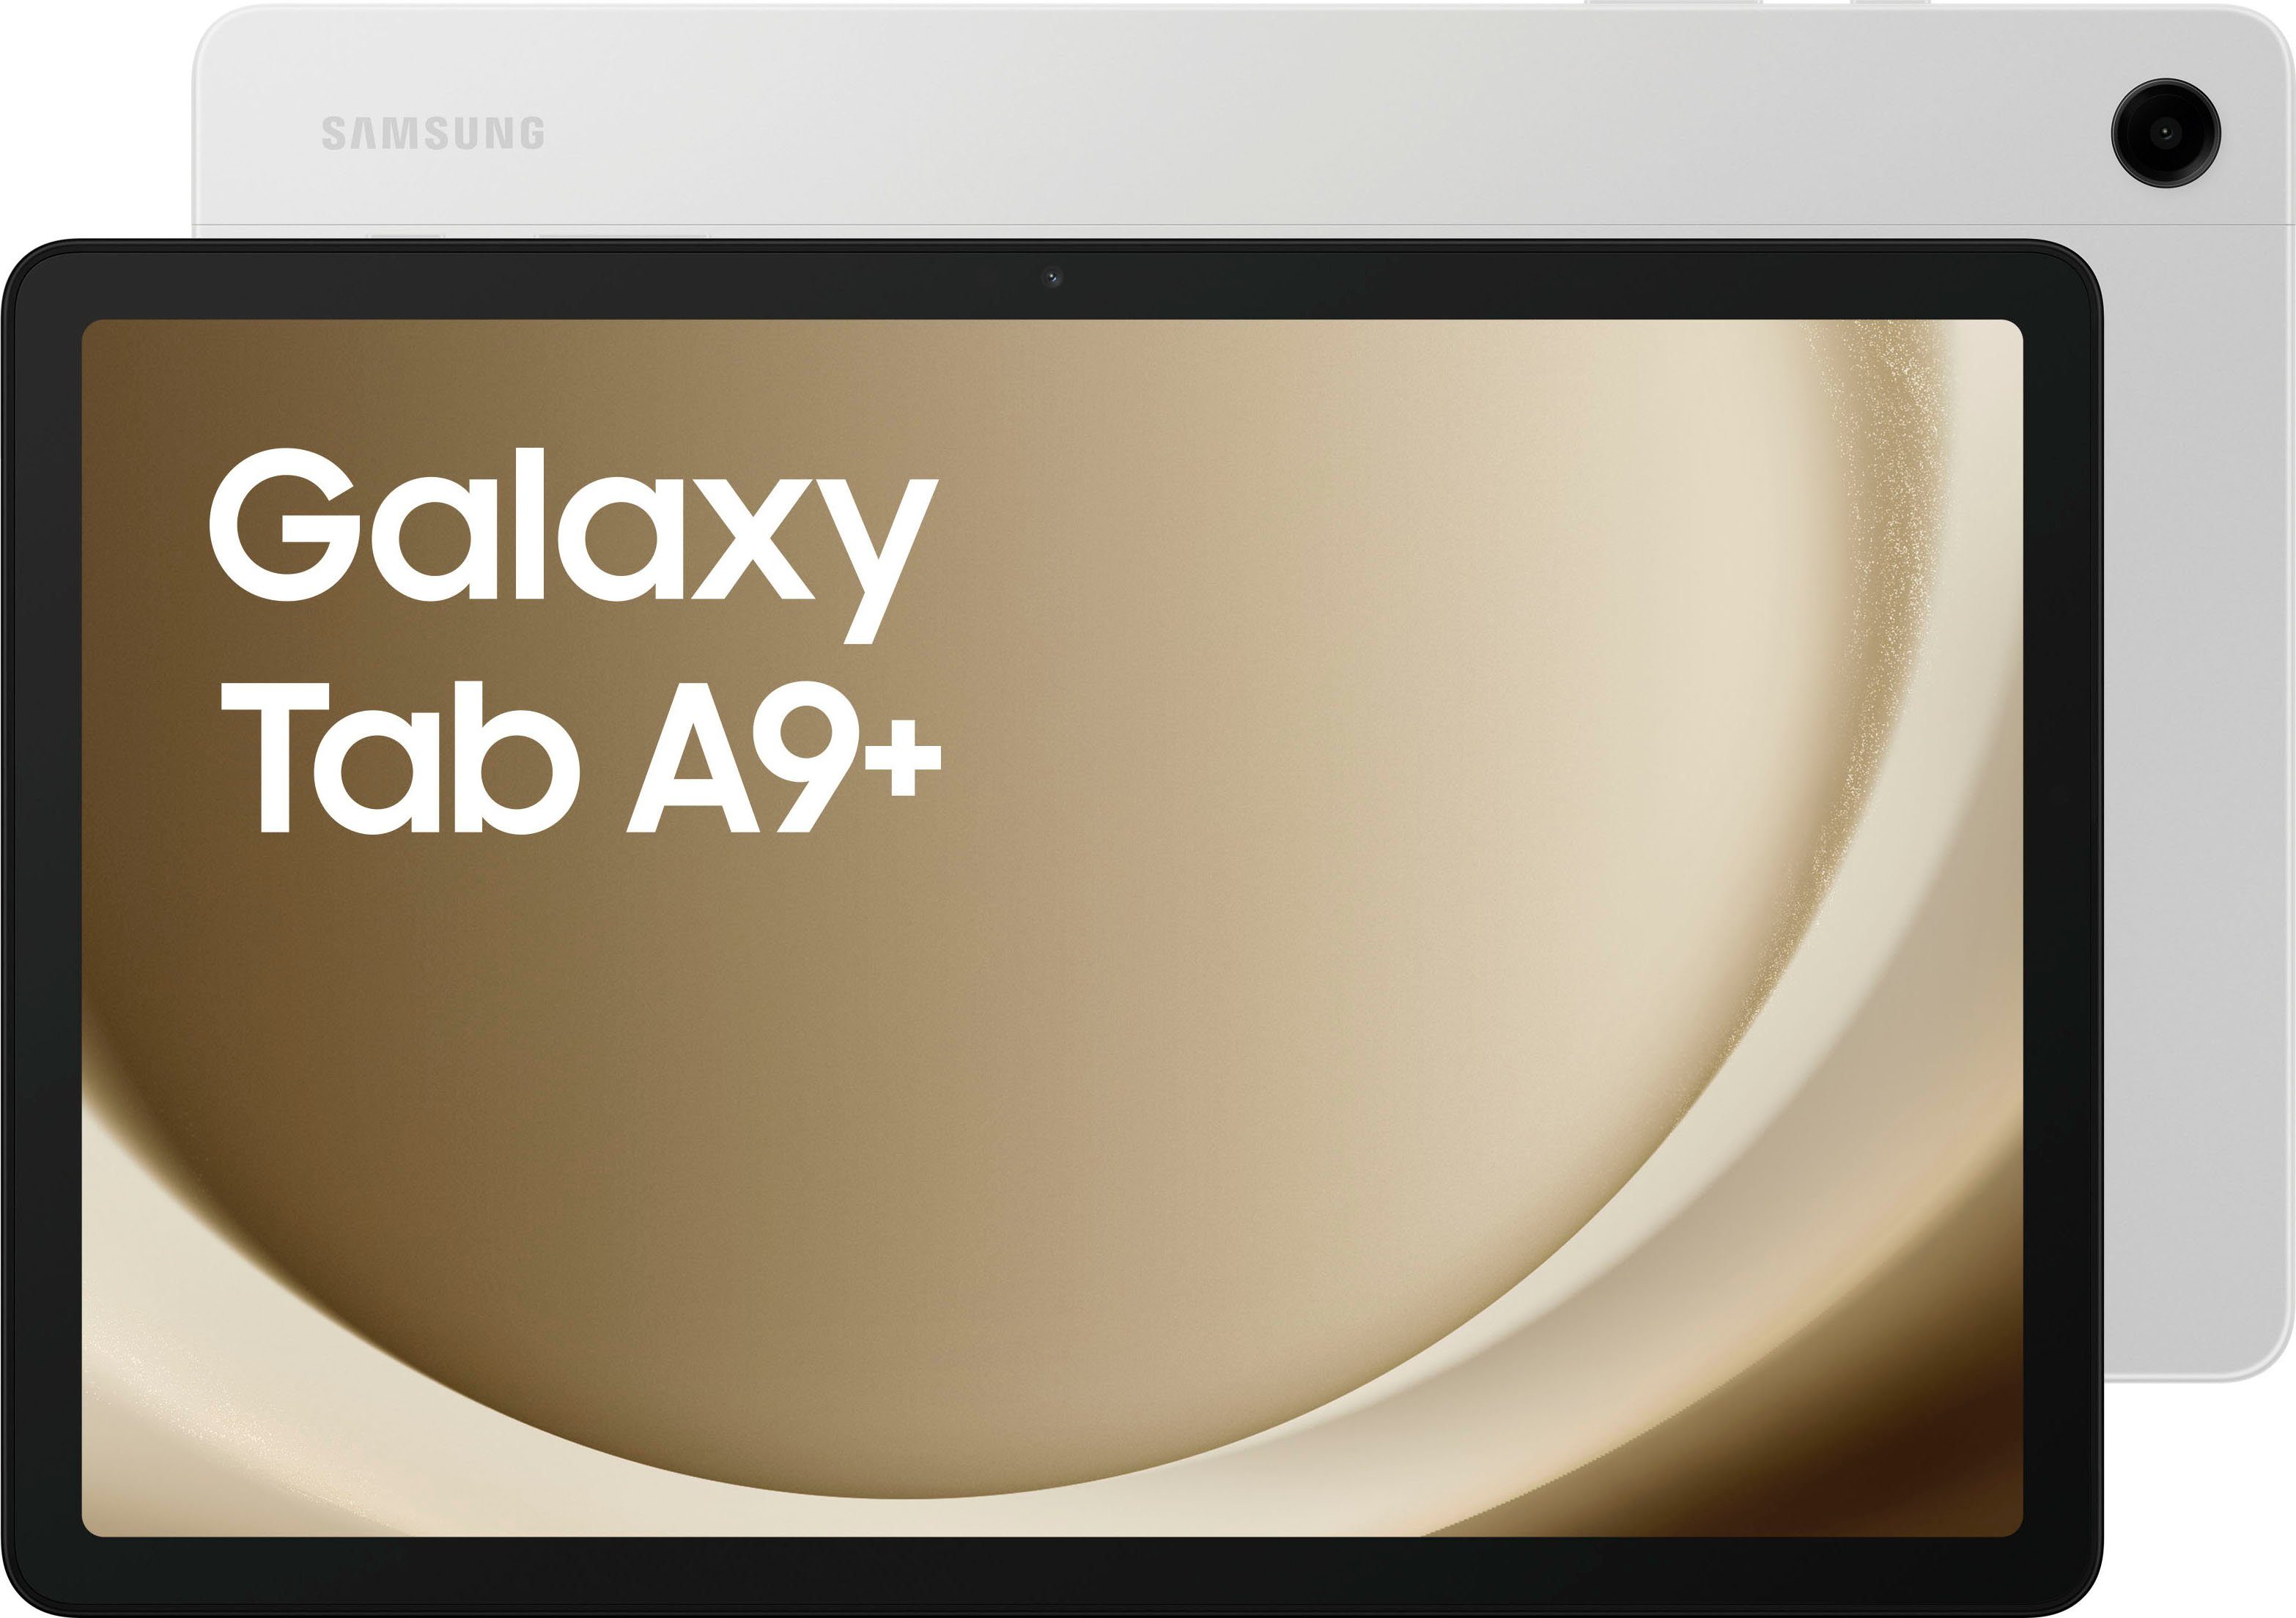 Samsung Tablet Galaxy Tab A9+, 11, Android,One UI,Knox